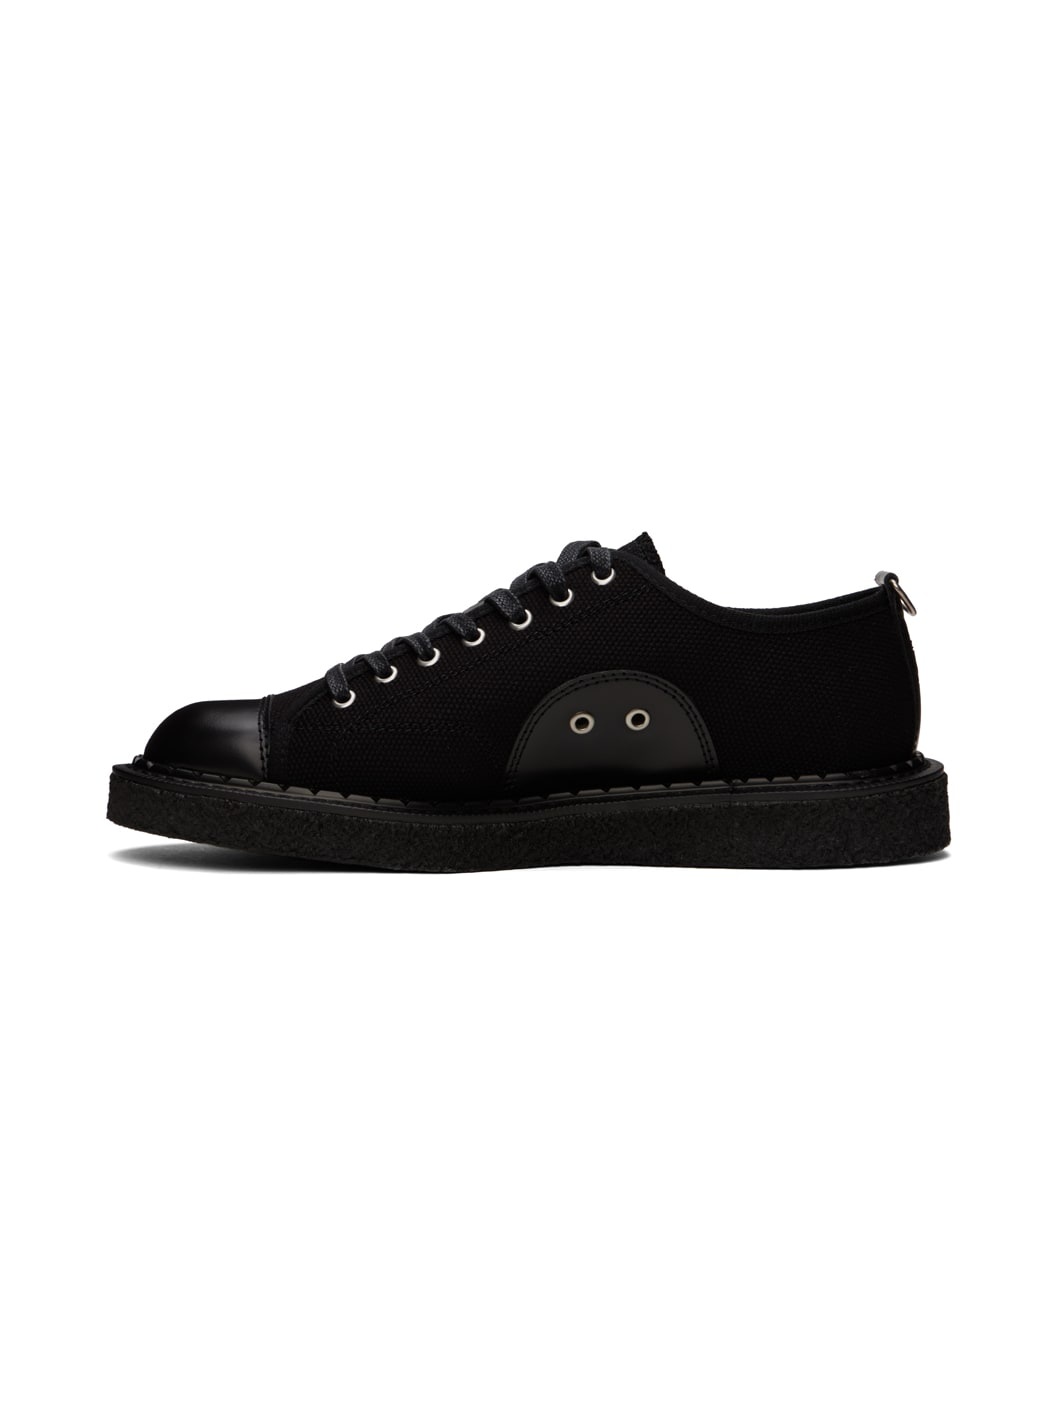 Black George Cox Edition Canvas Monkey Sneakers - 3